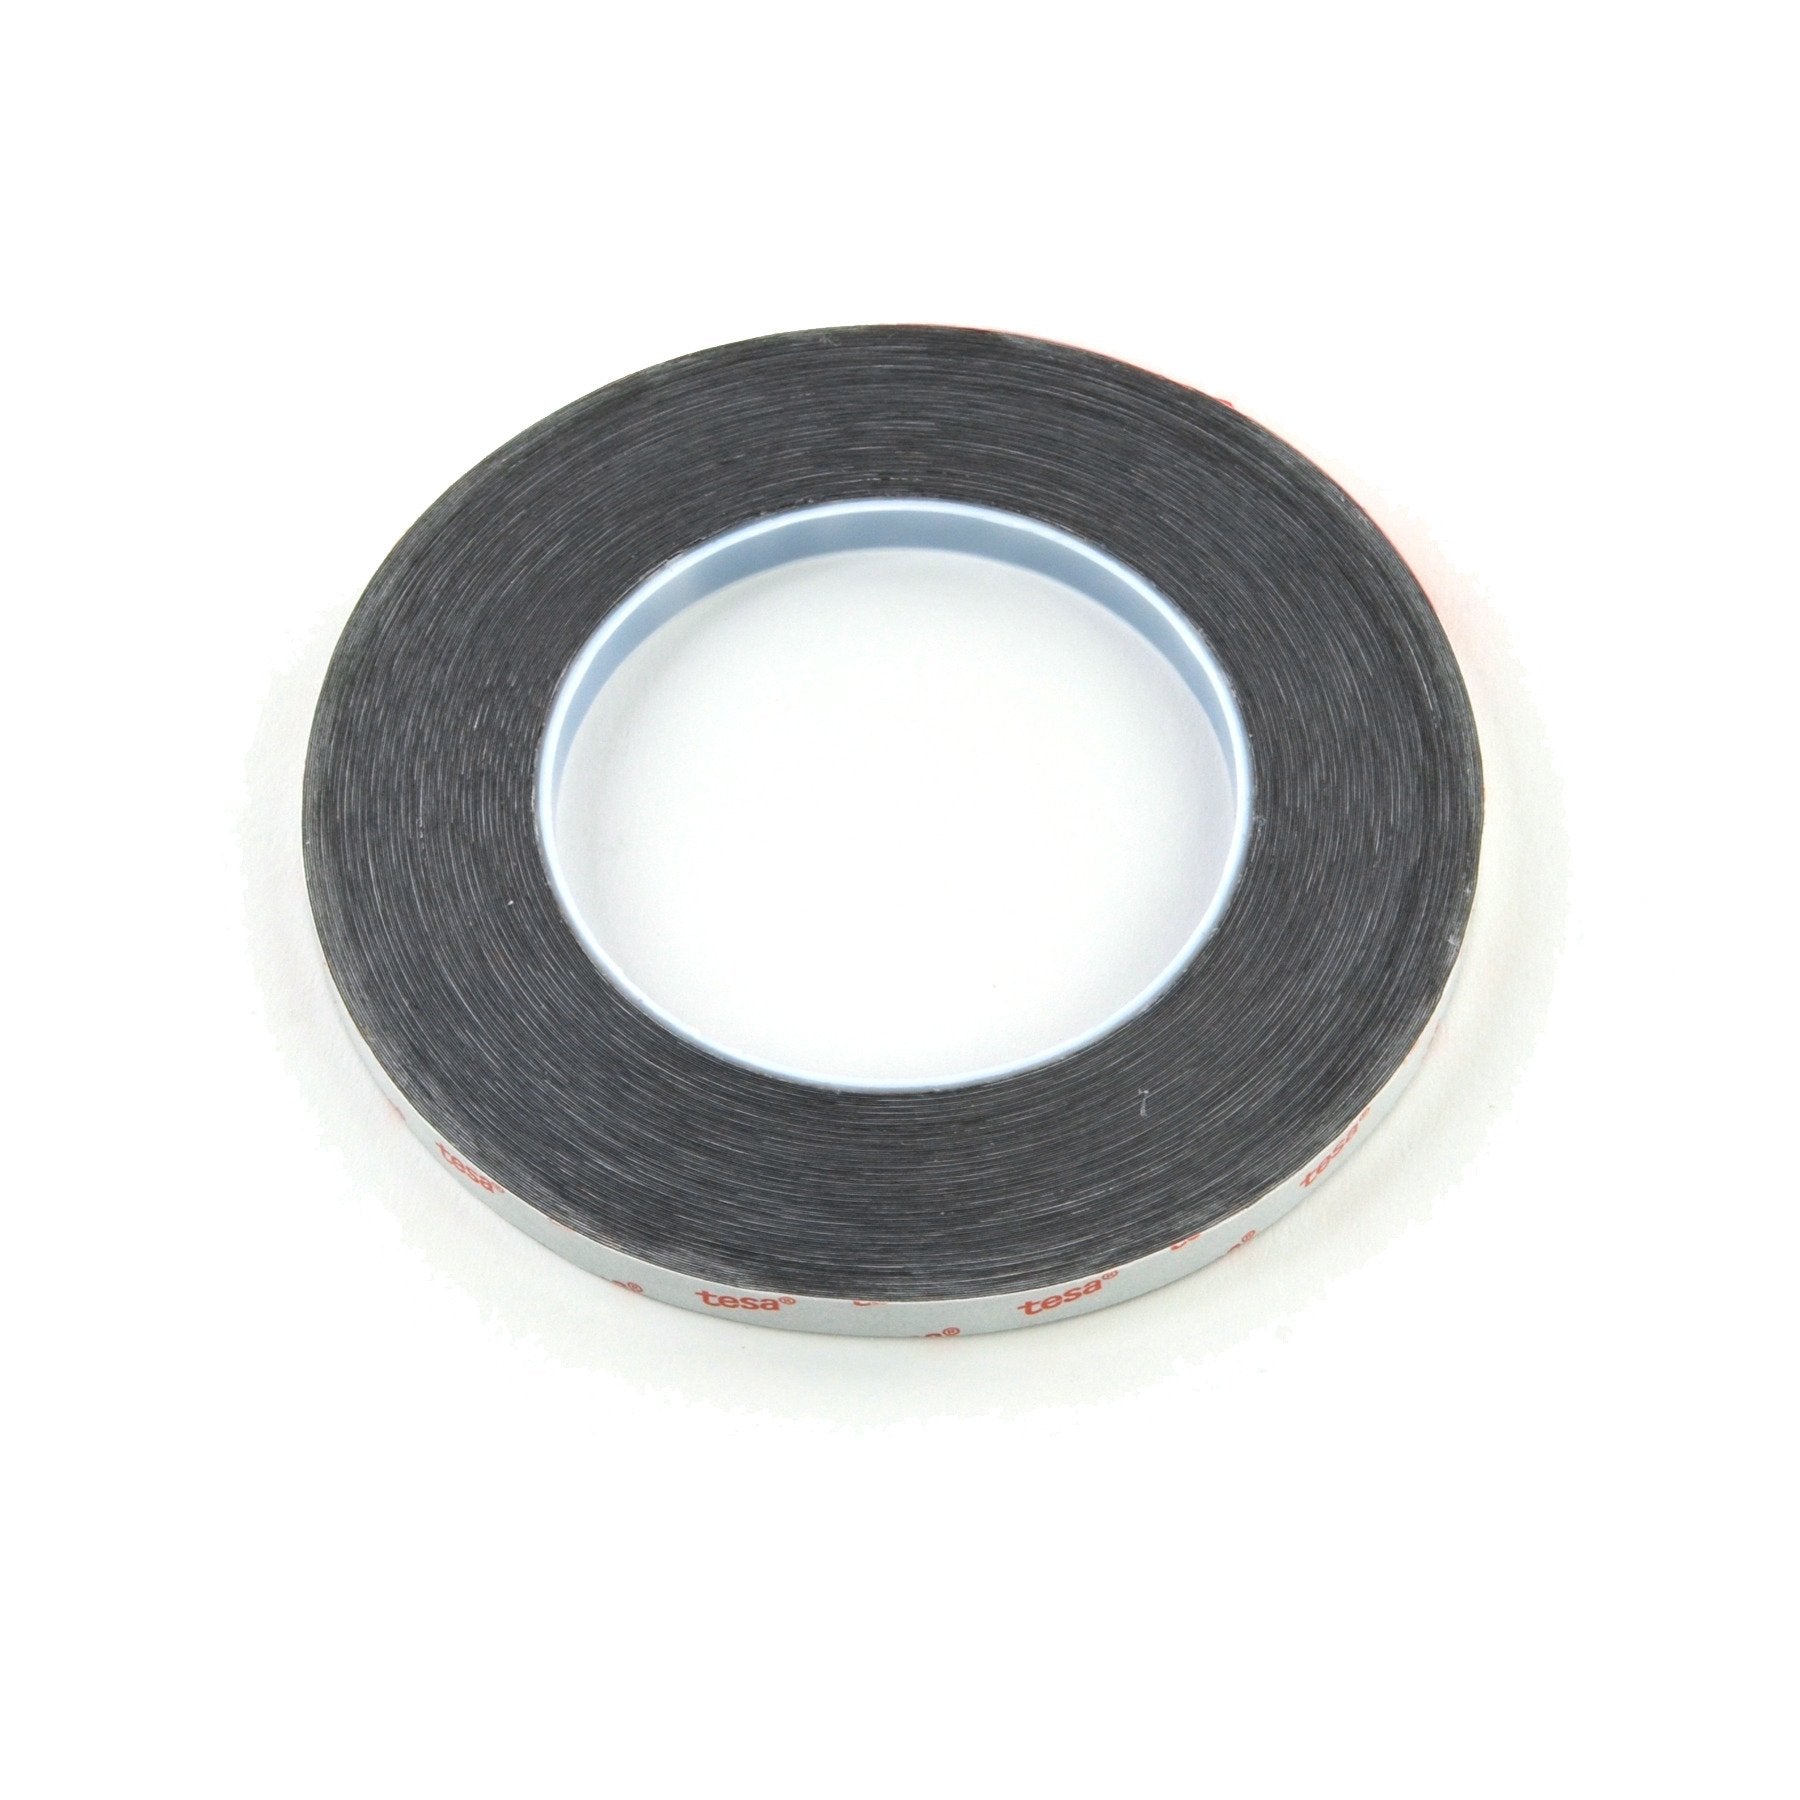 Tesa 61395 Tape New 1 mm Wide Double-Sided Roll